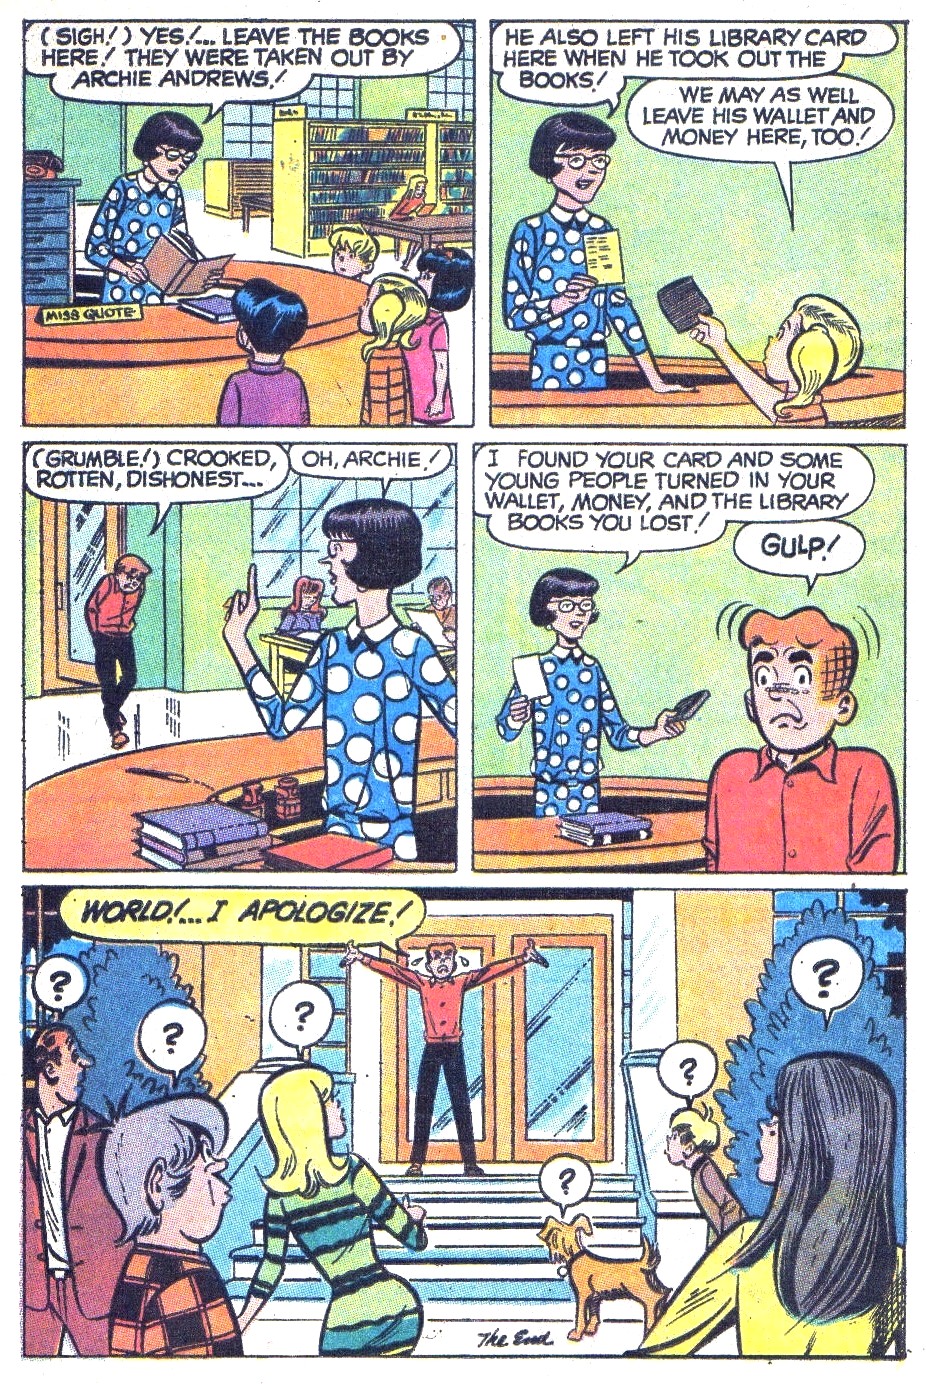 Archie (1960) 196 Page 24